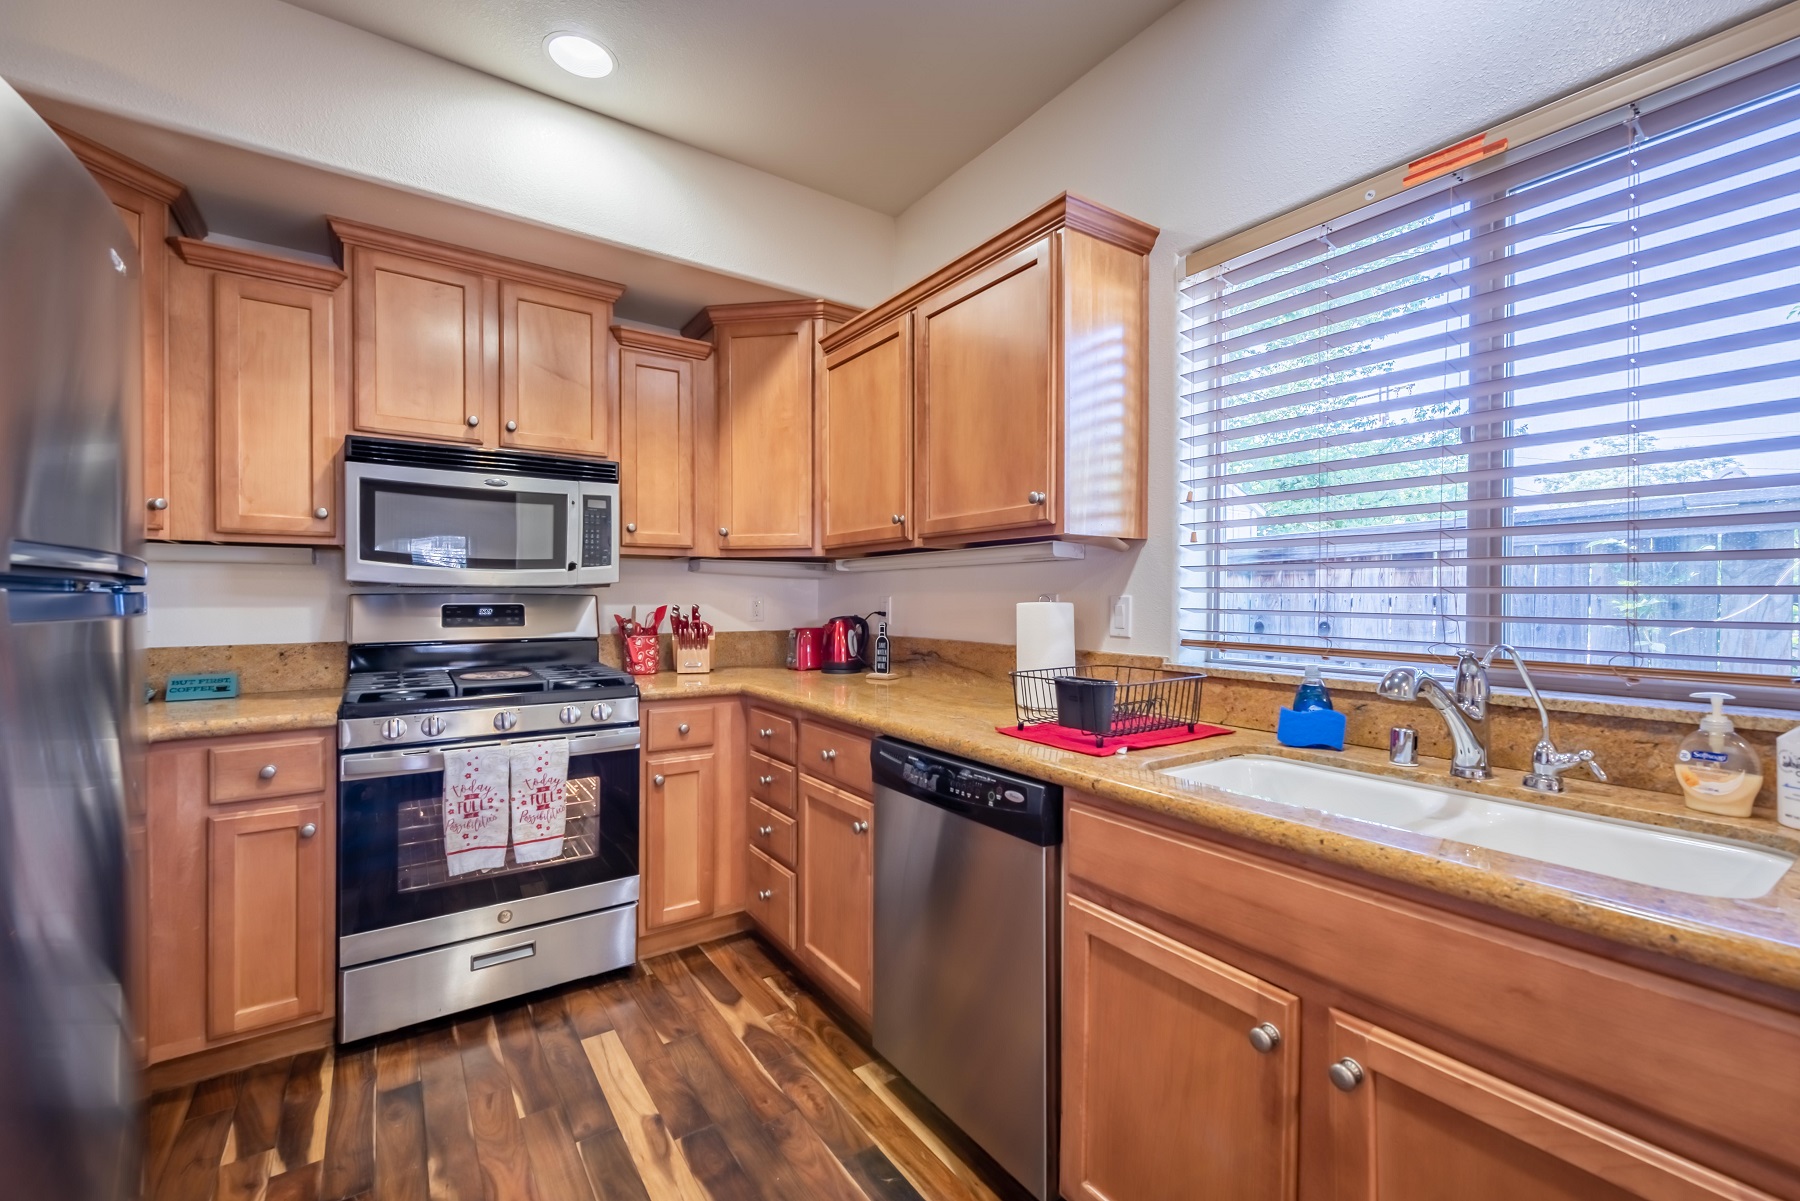 Kitchen with Stainless steel appliance, 4-burner stovetop with center griddle, dishwasher, microwave and all the essentials to cook up a storm.